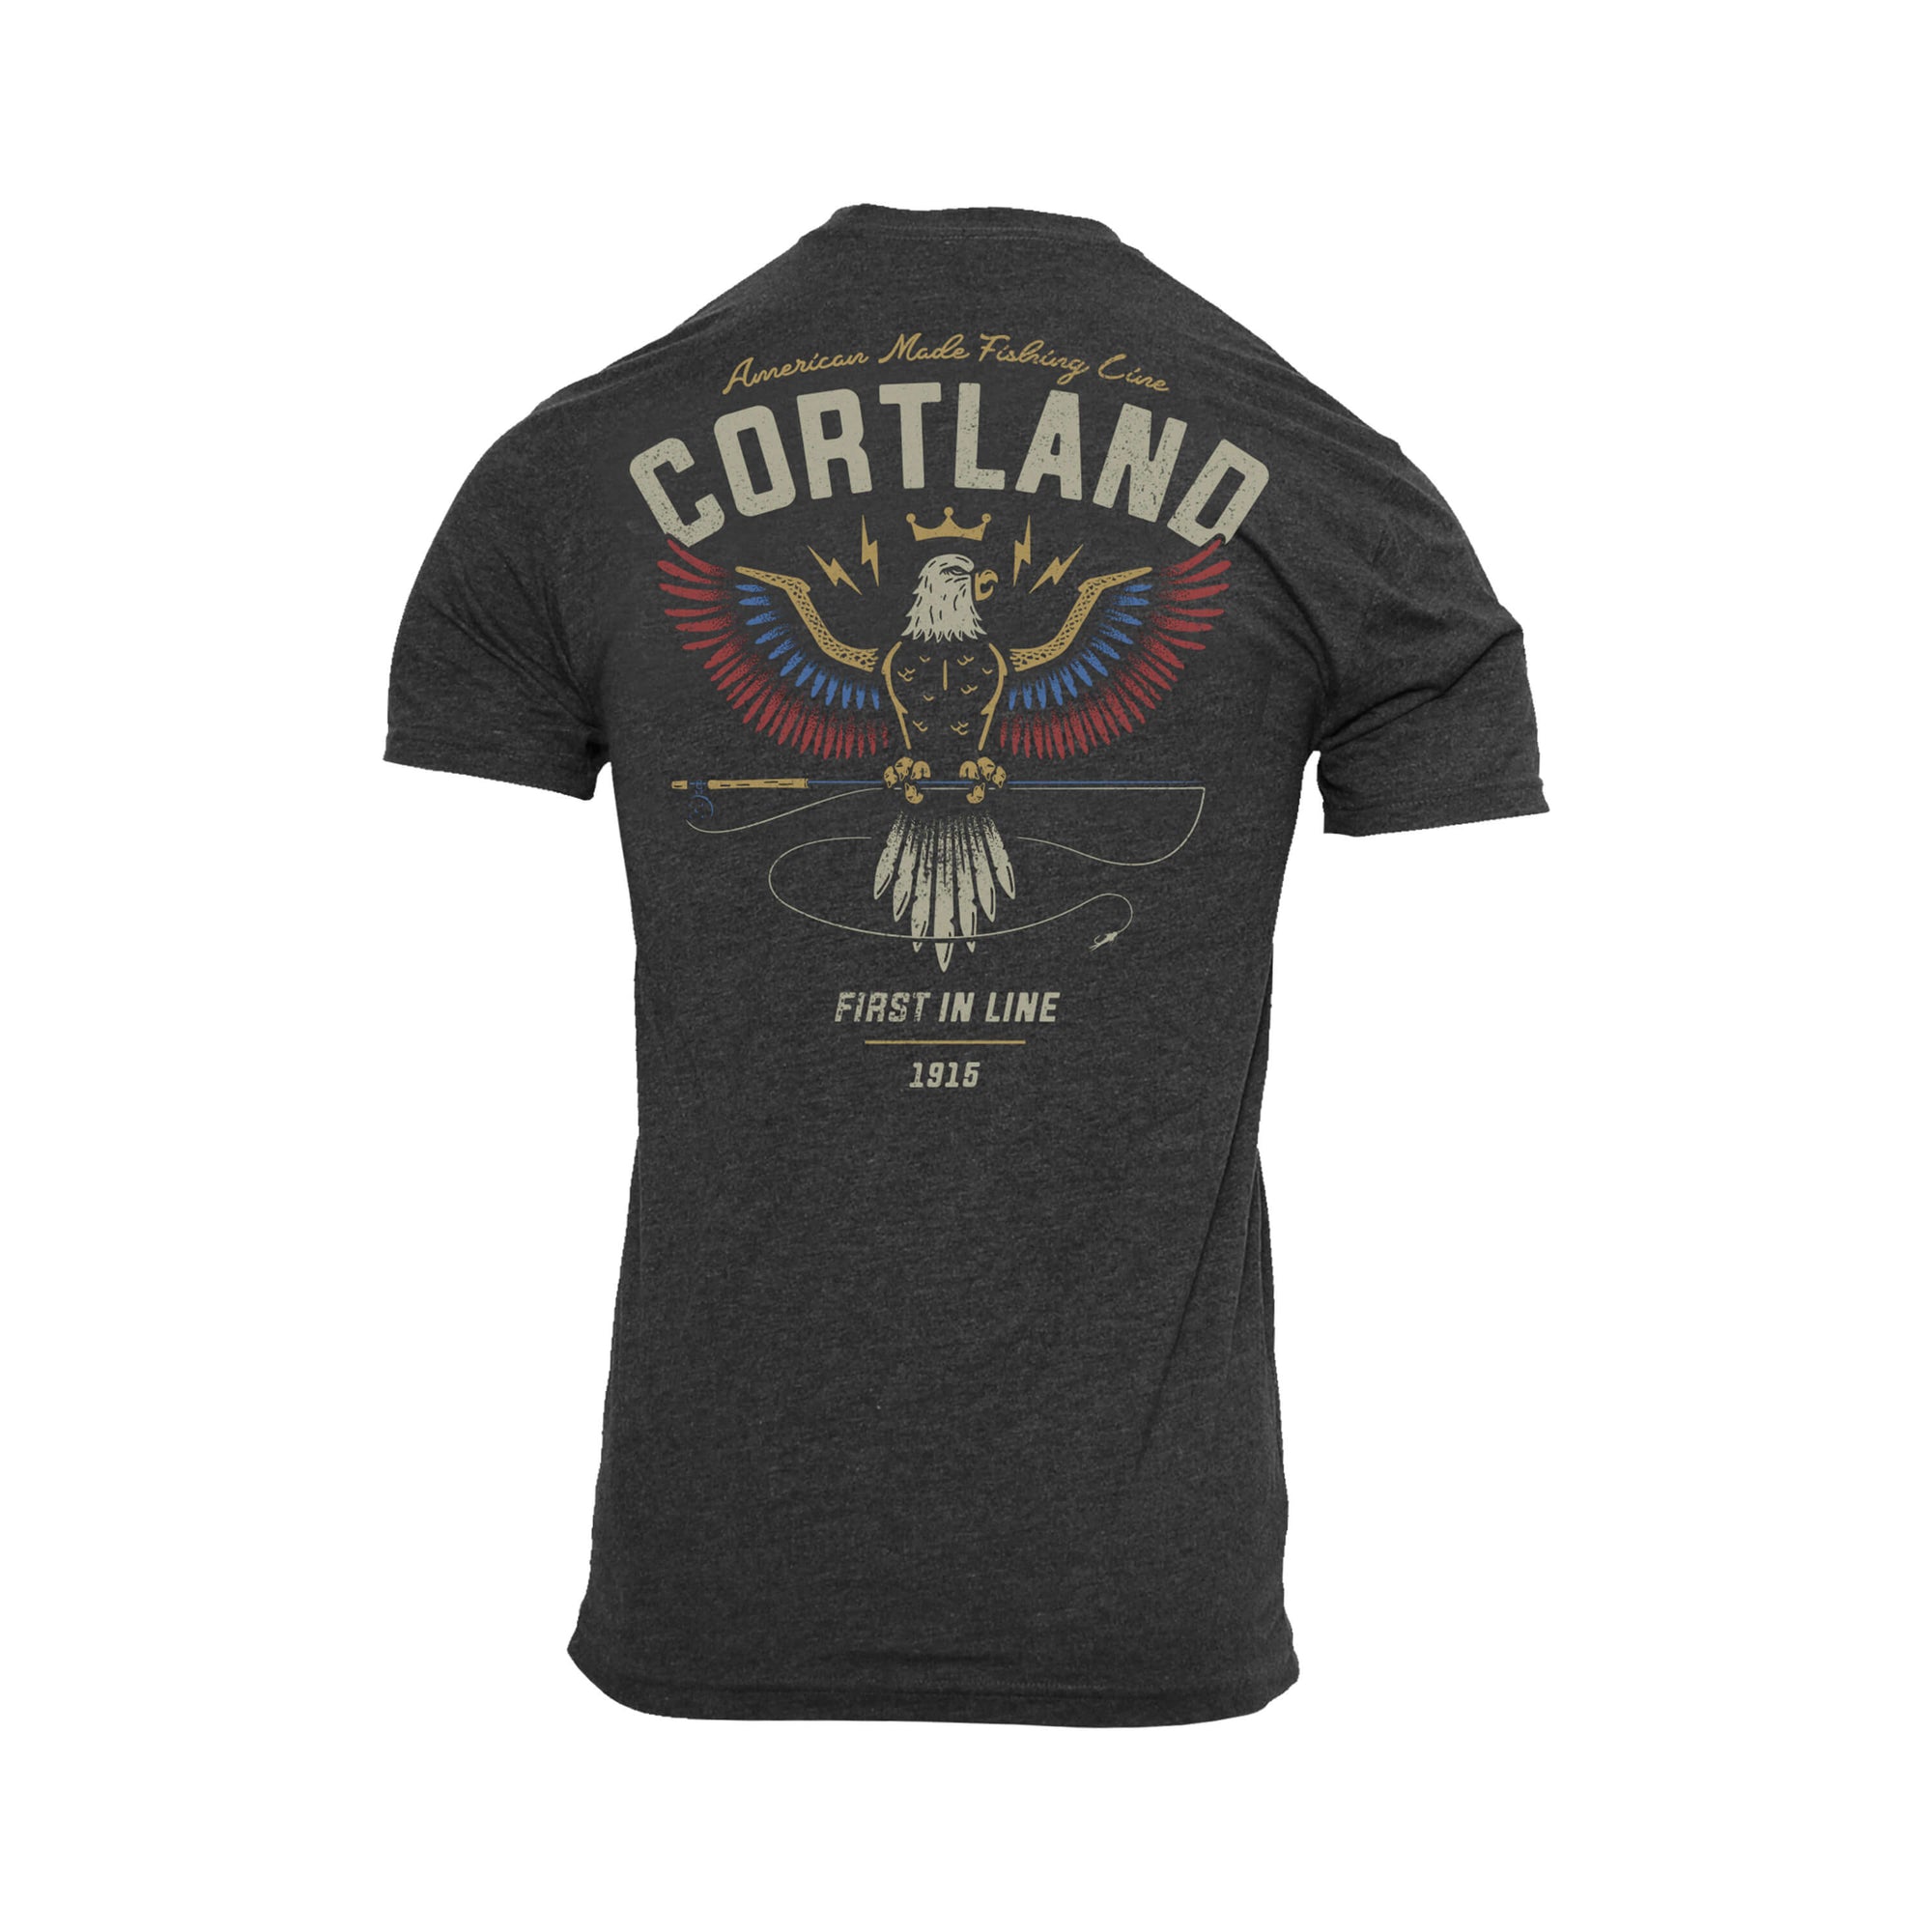 Soaring Eagle T-Shirt. The logo has Cortland at the top with an eagle holding onto a fly rod in its talons. The eagle&#39;s wings are yellow, blue, and red. 